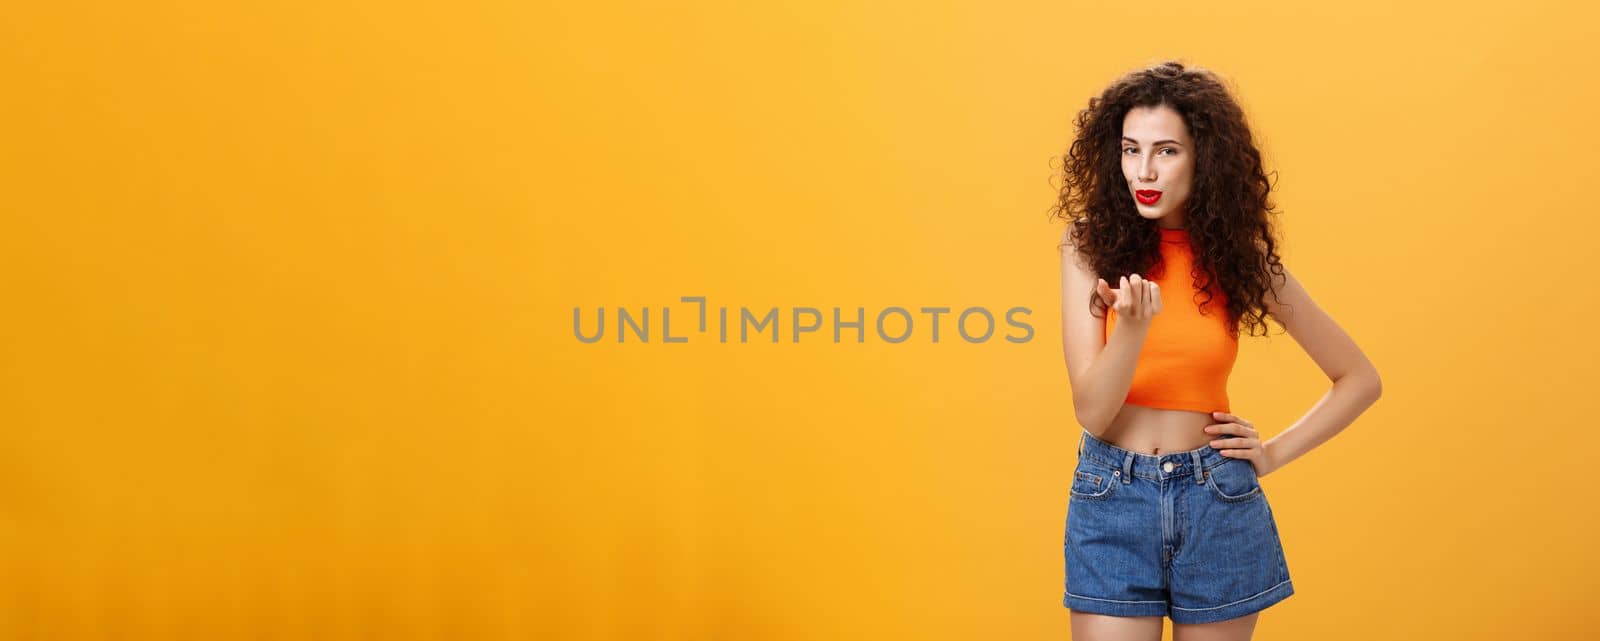 Woman seducing hot guy. Sensual and sexy daring female with curly hairstyle in stylish modern cropped top and shorts showing come here gesture inviting move closer flirting over orange background.